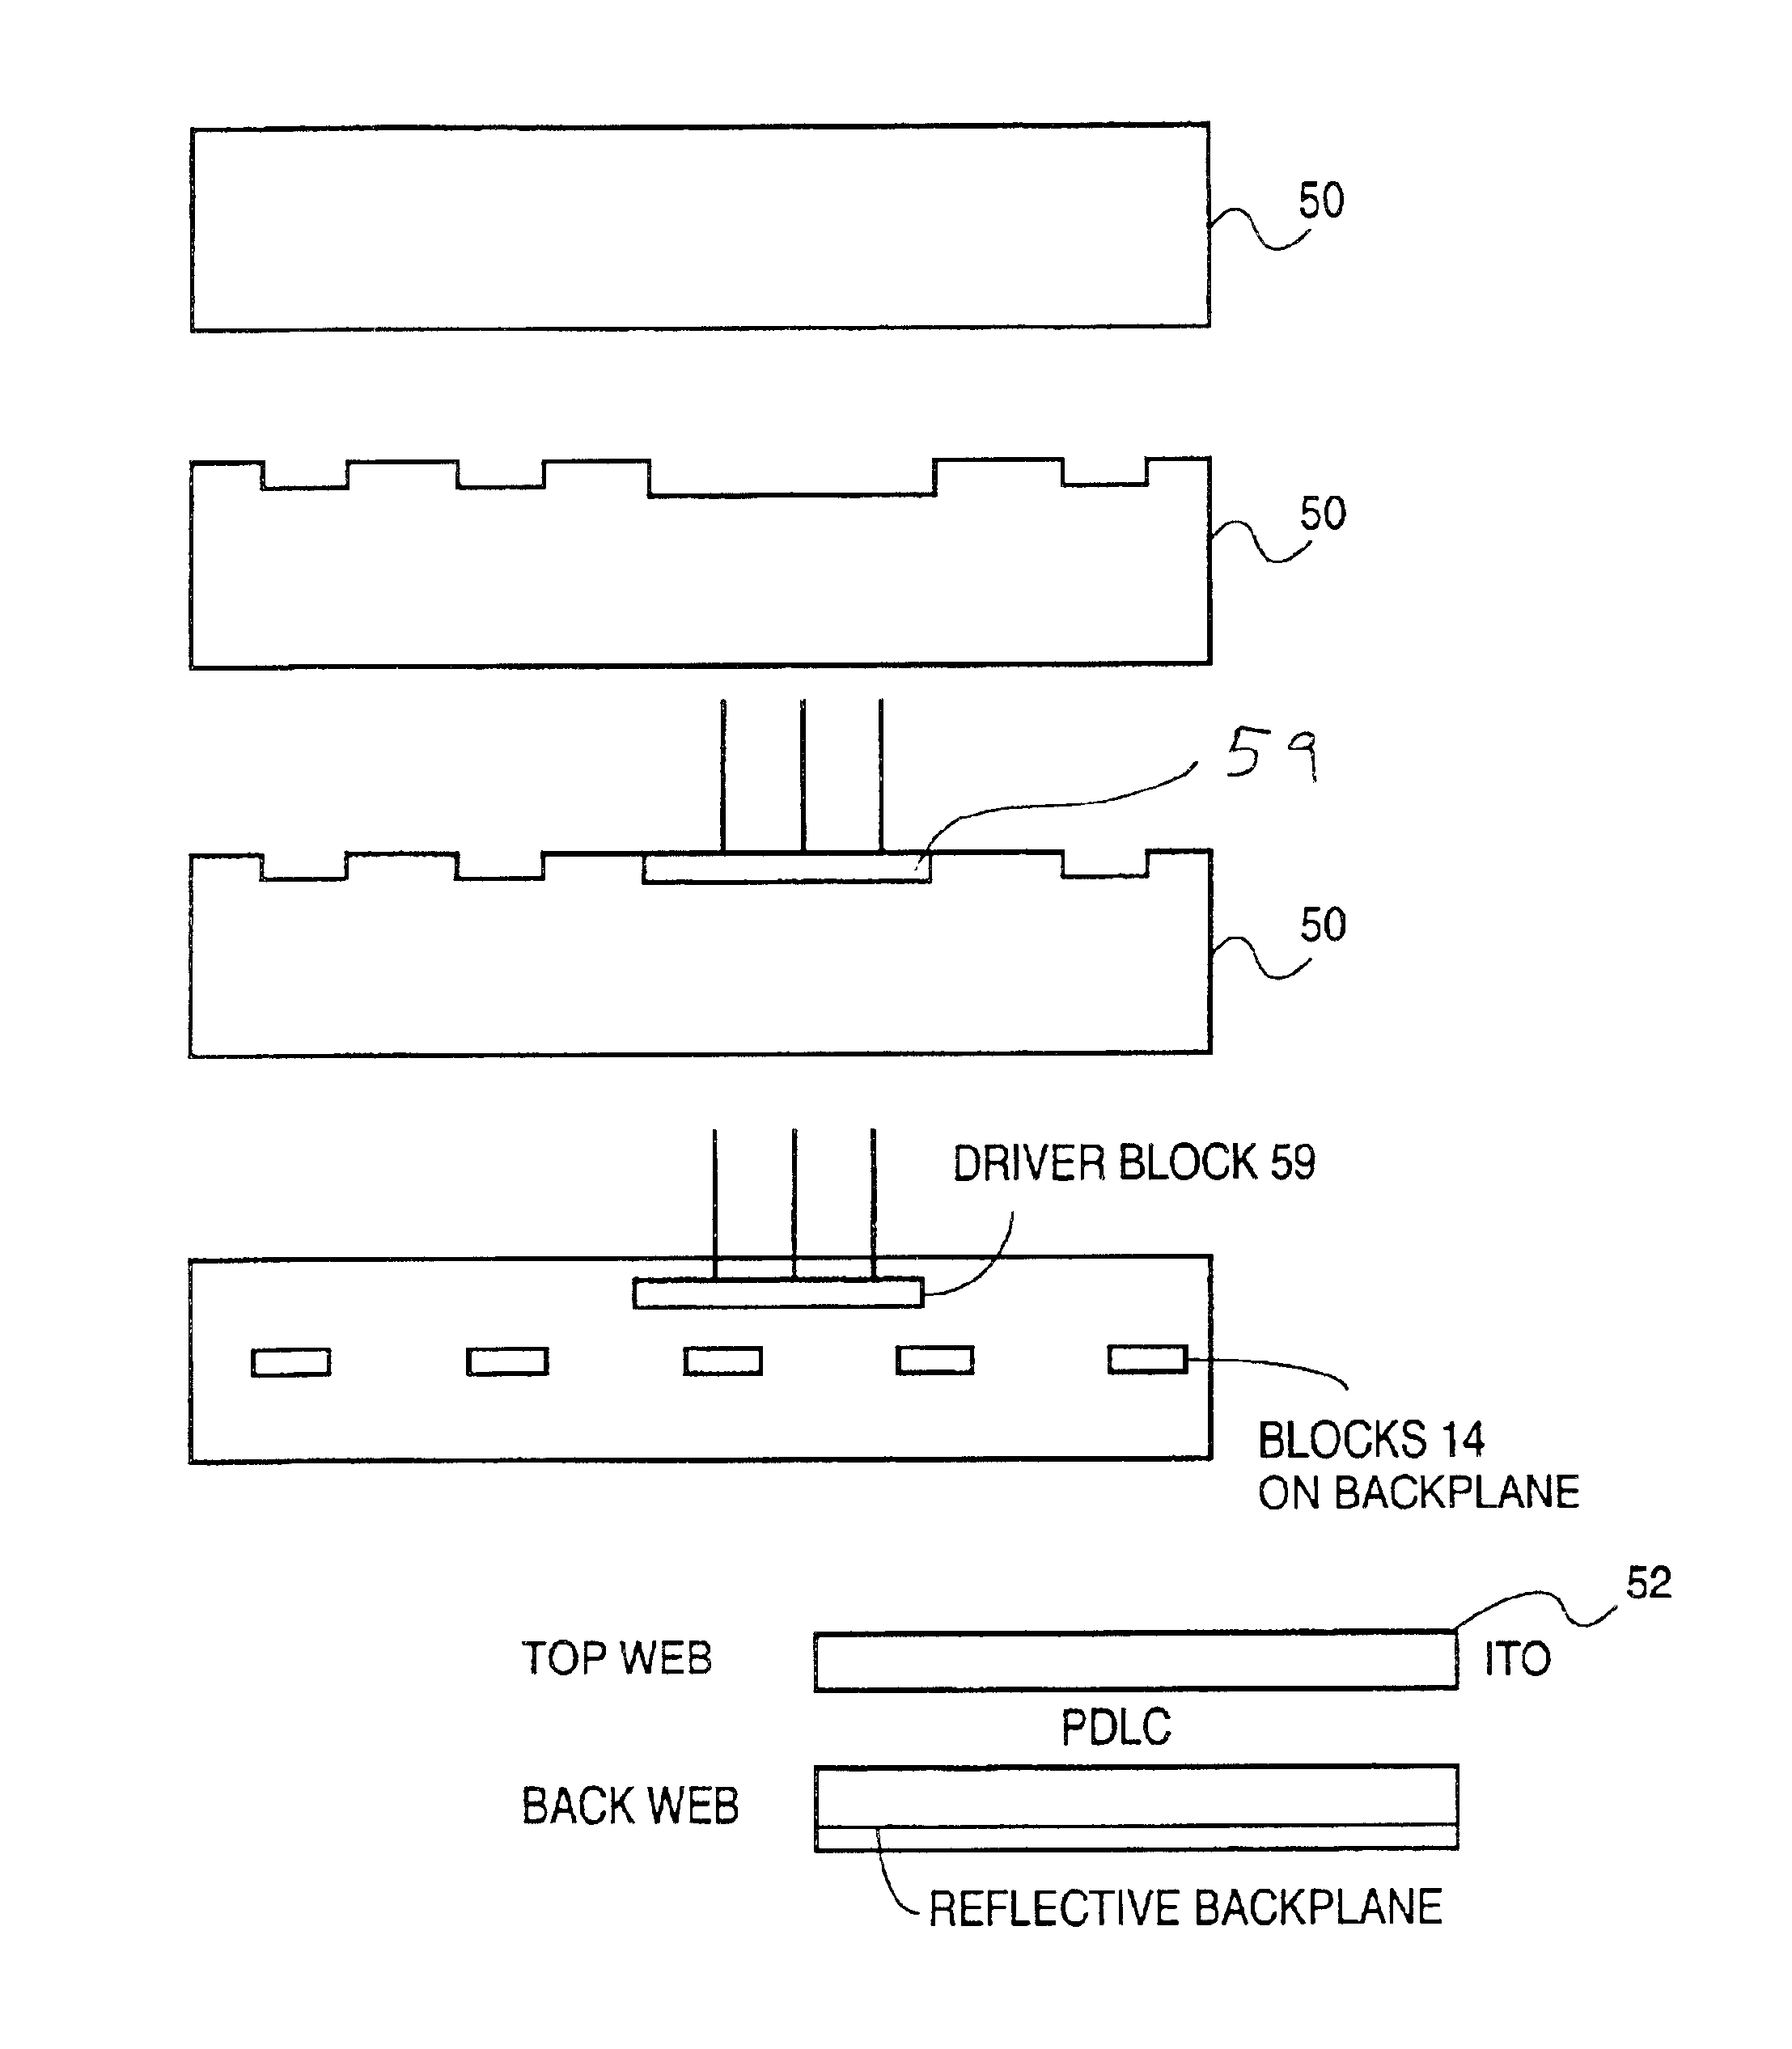 Apparatuses and methods for forming electronic assemblies